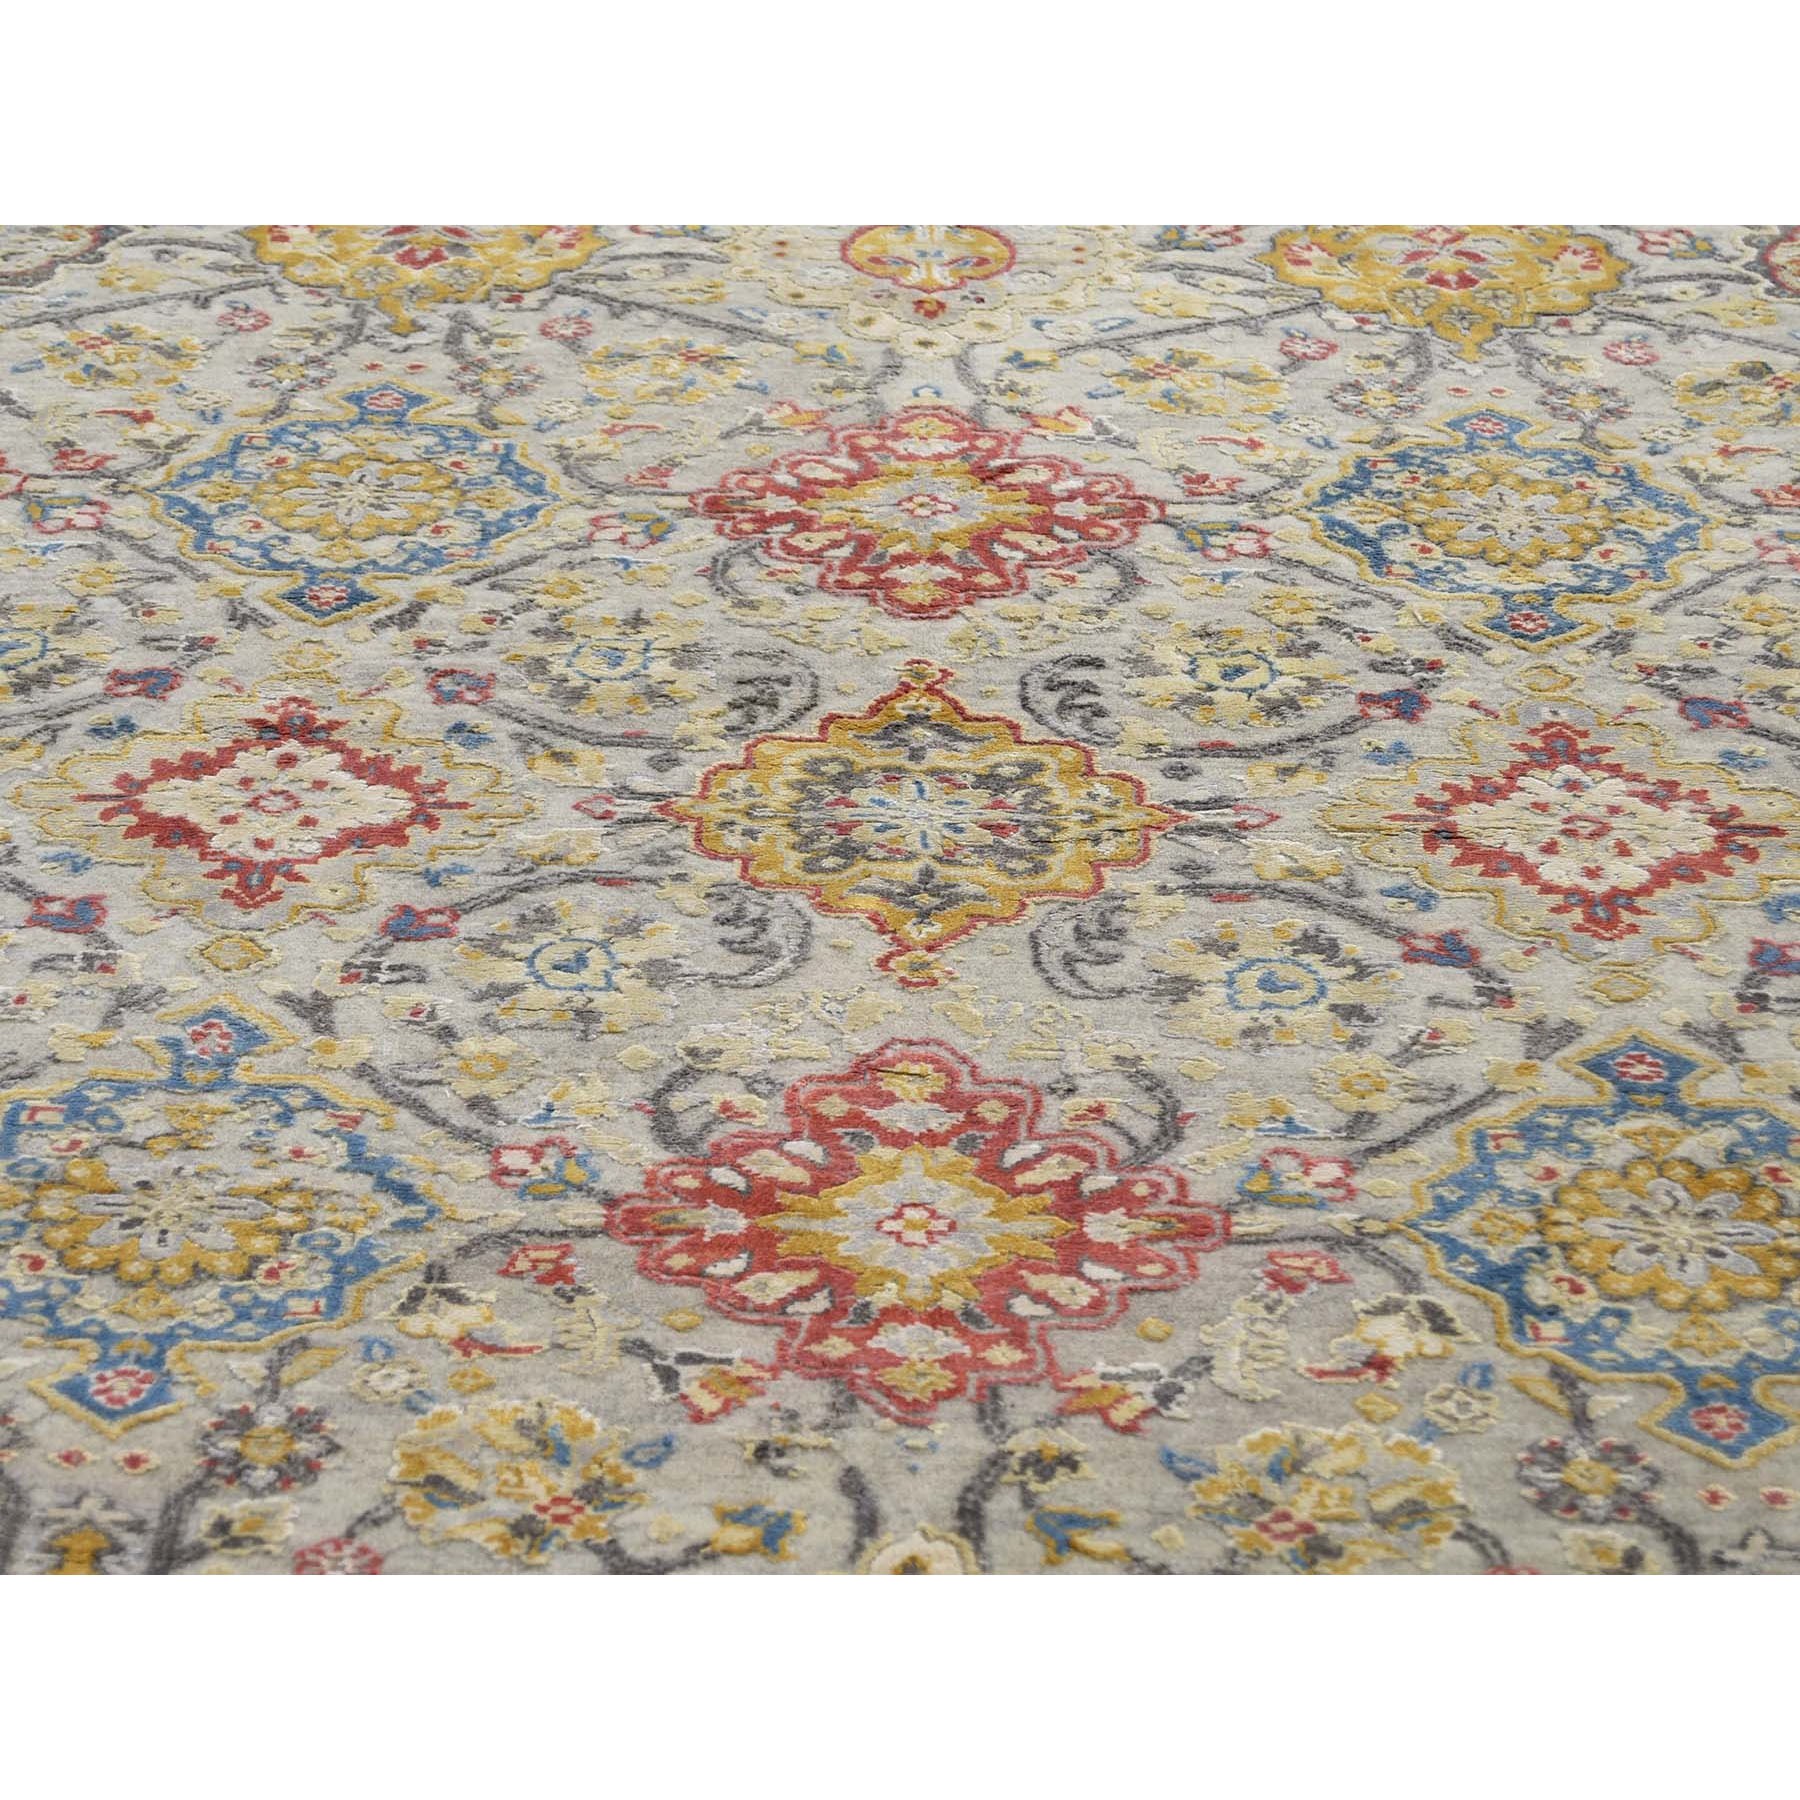 11-8 x11-8  THE SUNSET ROSETTES Pure Silk and Wool Hand Knotted Oriental Round Rug 